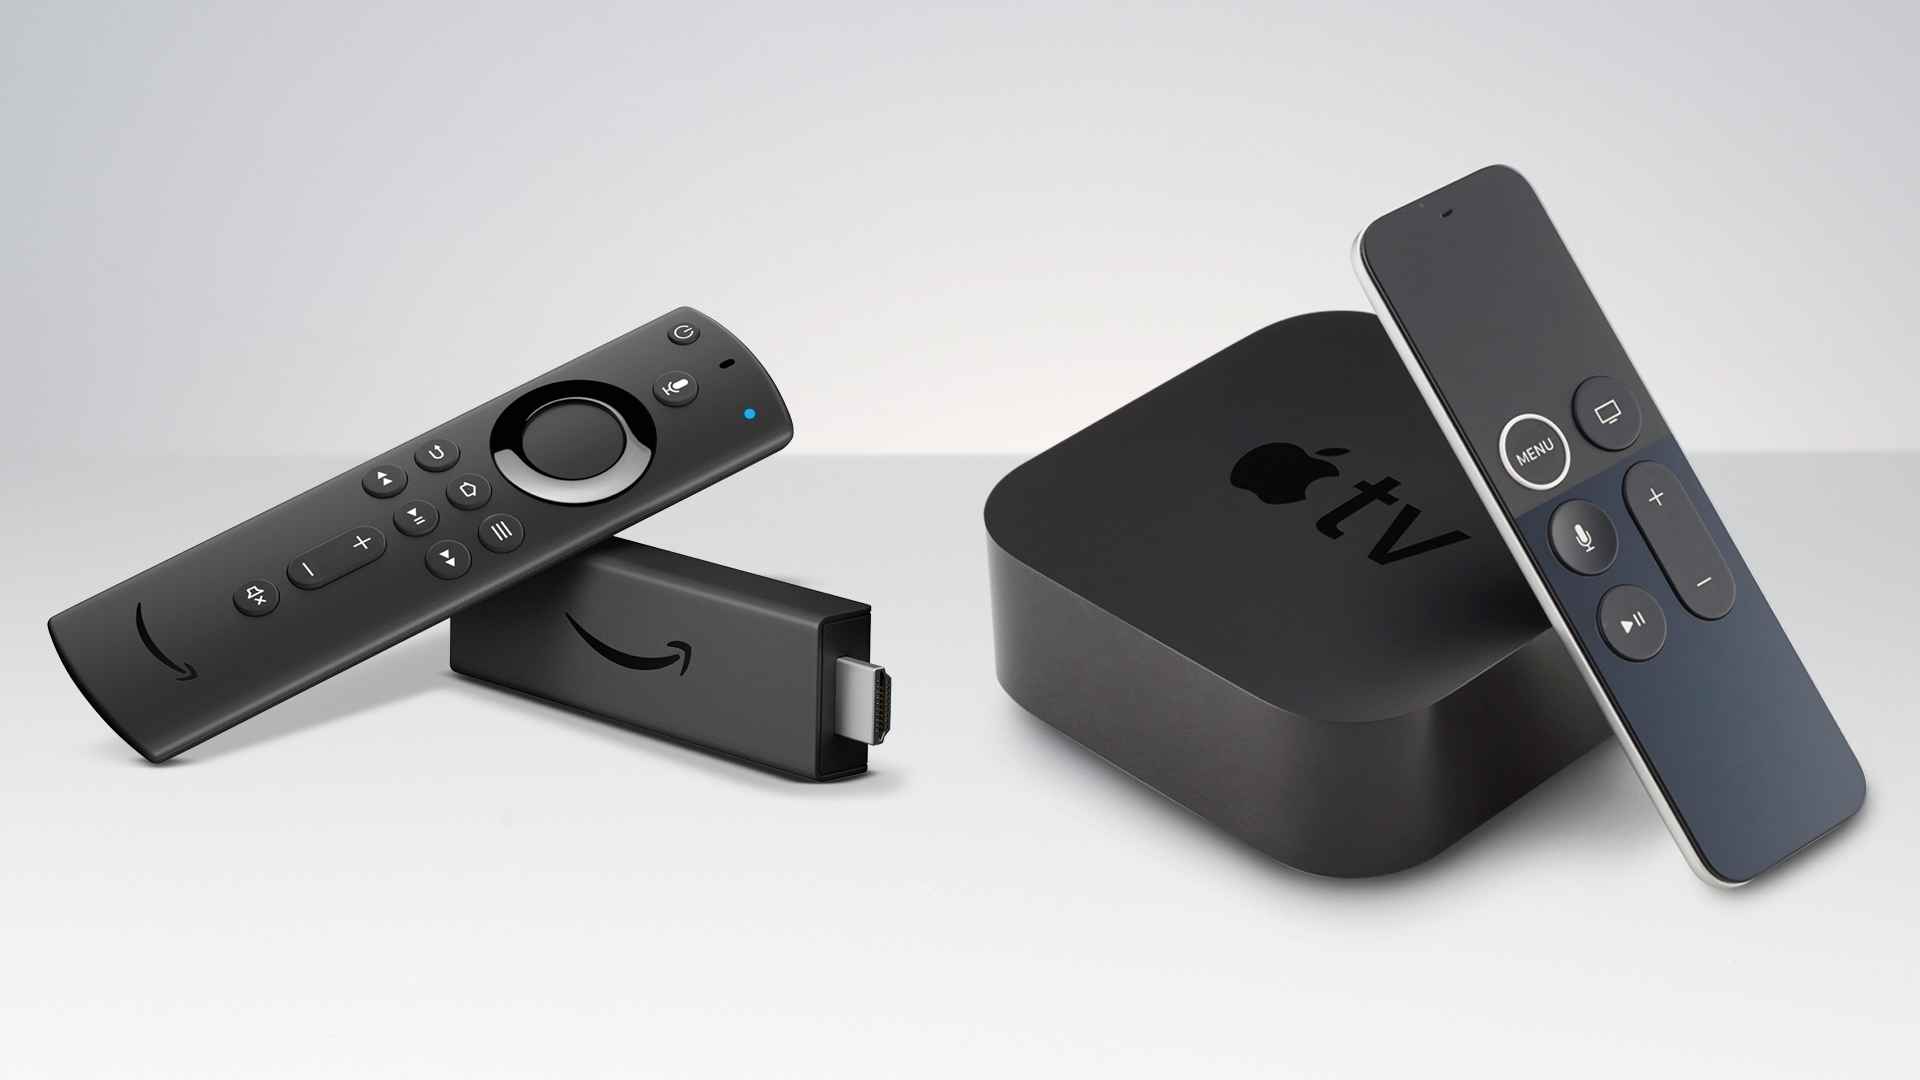 Fire TV Stick and IPTV as Cable TV Alternatives